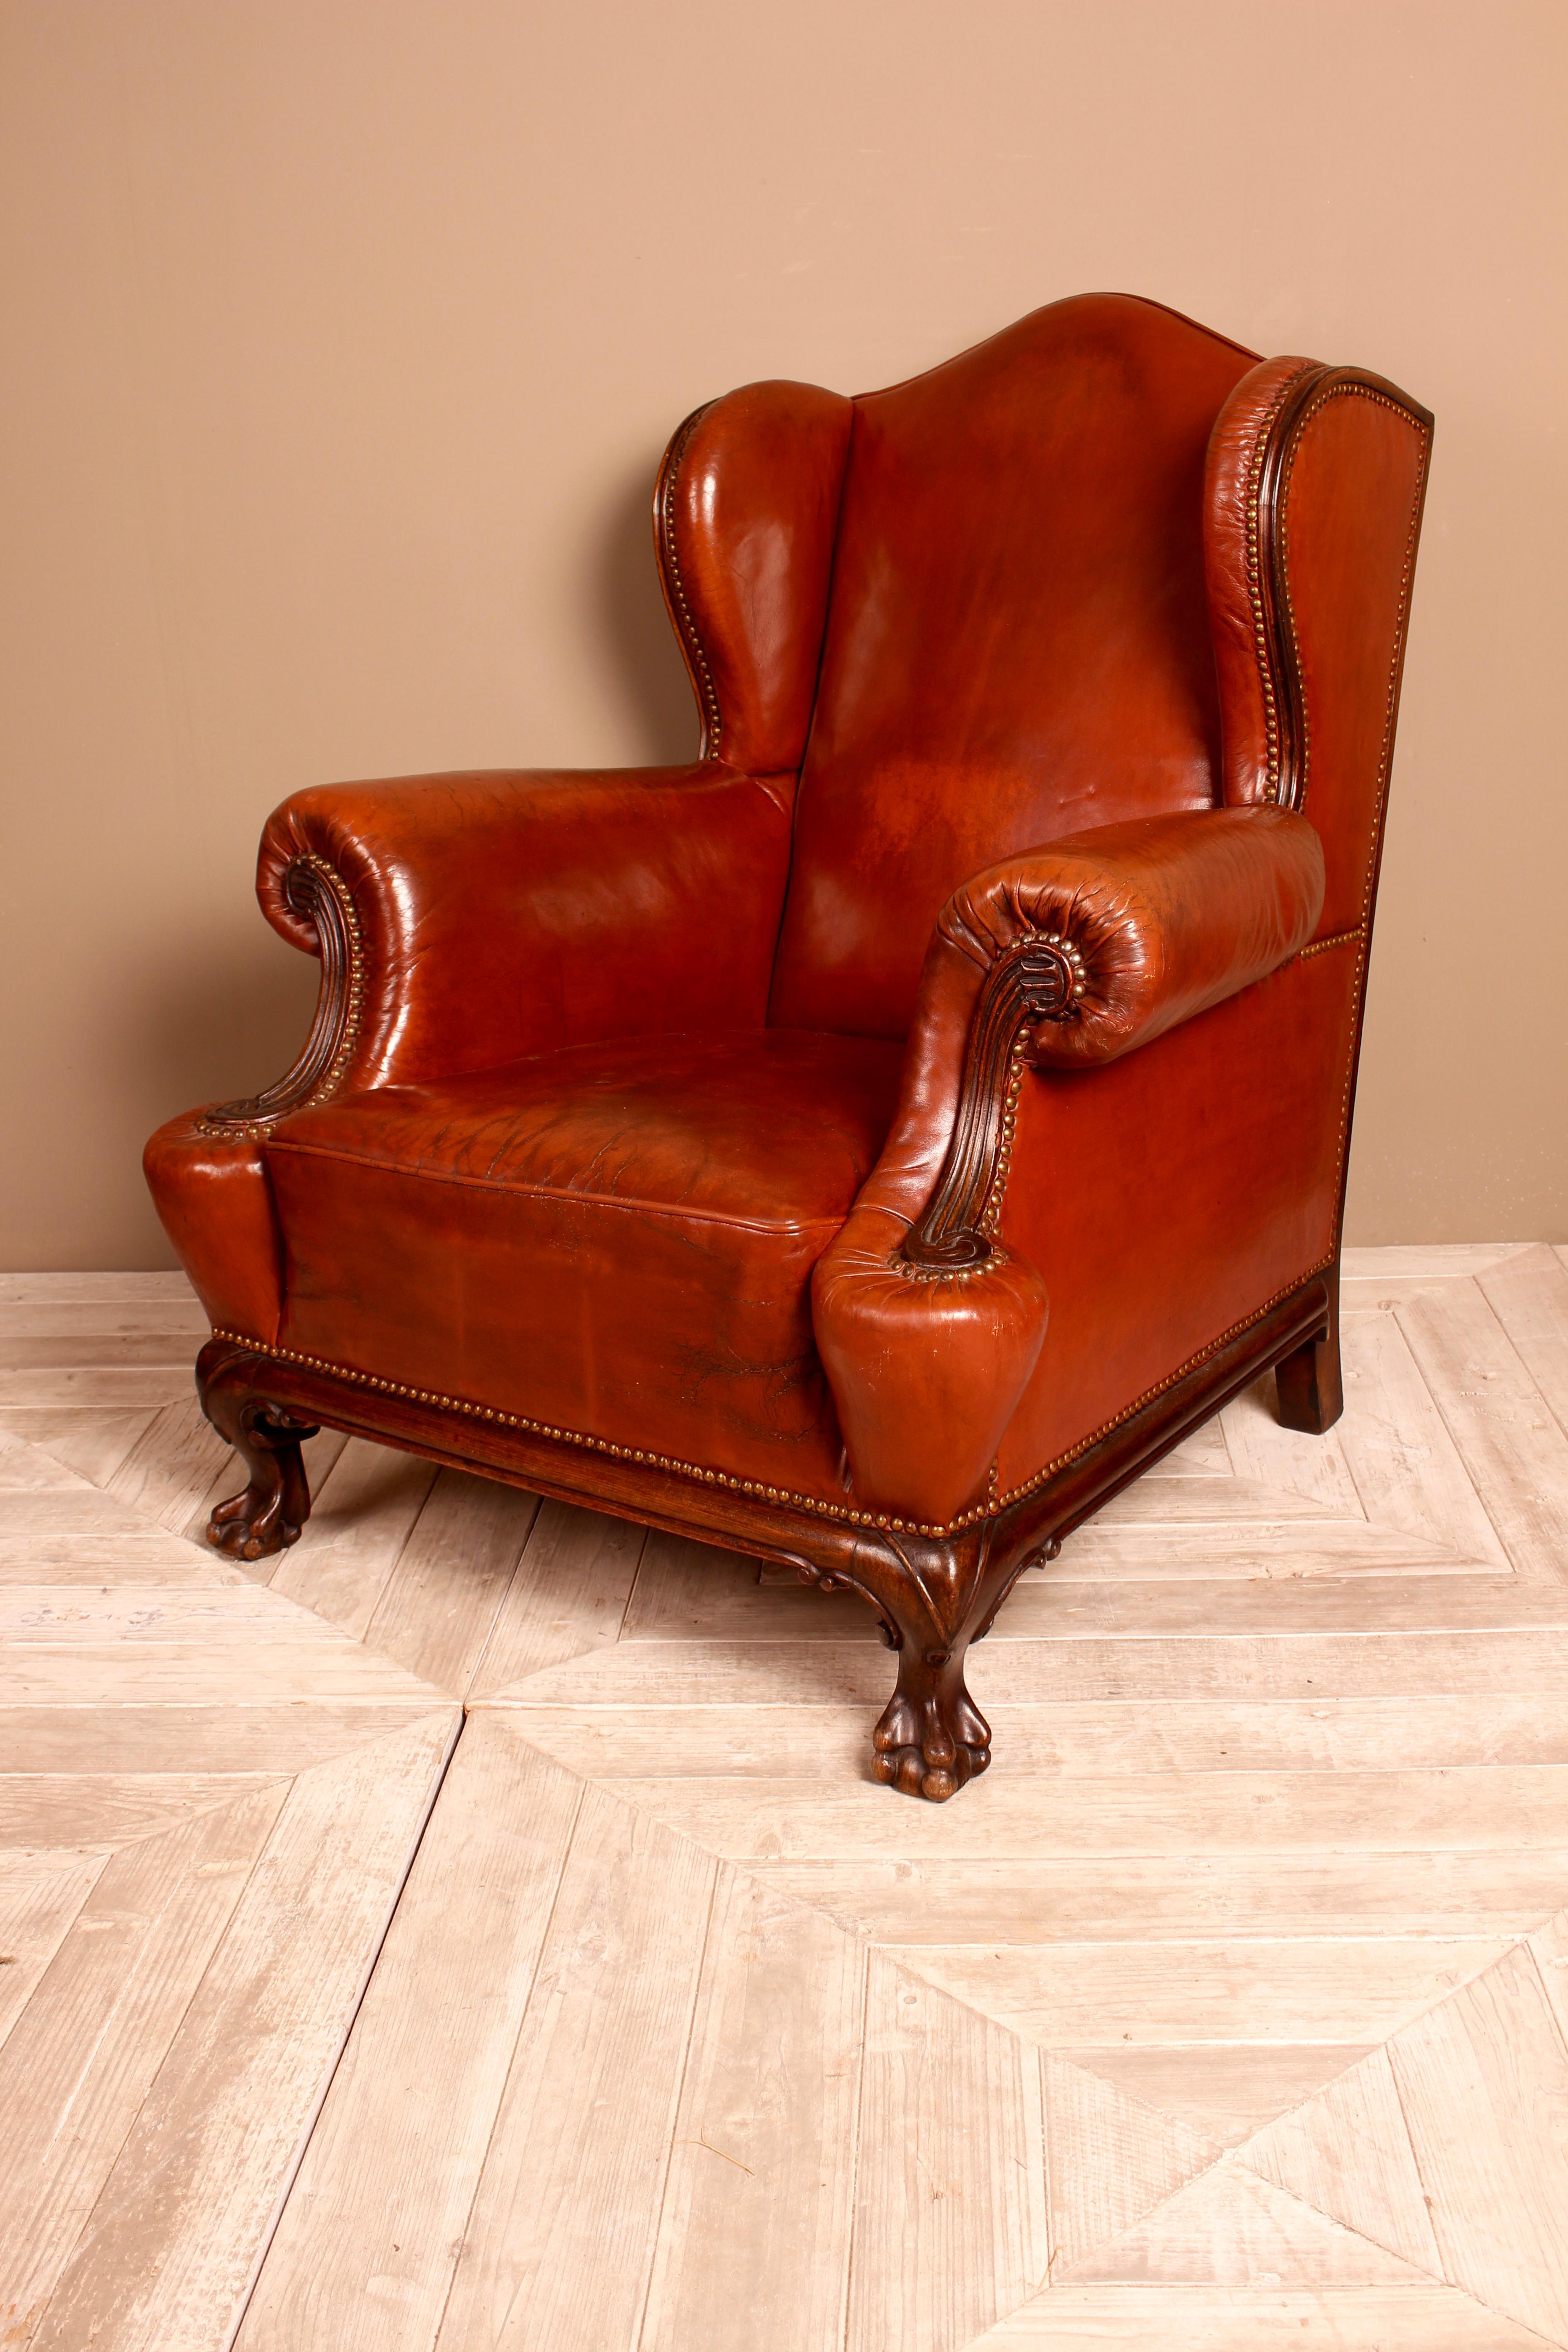 A Classic late 19th century mahogany leather wingback armchair. Traditionally made with solid wood frame, leather and stud detail and sprung seat. With deep wingback frame, scroll arms and wooden show frame. Standing on an attractive lower show